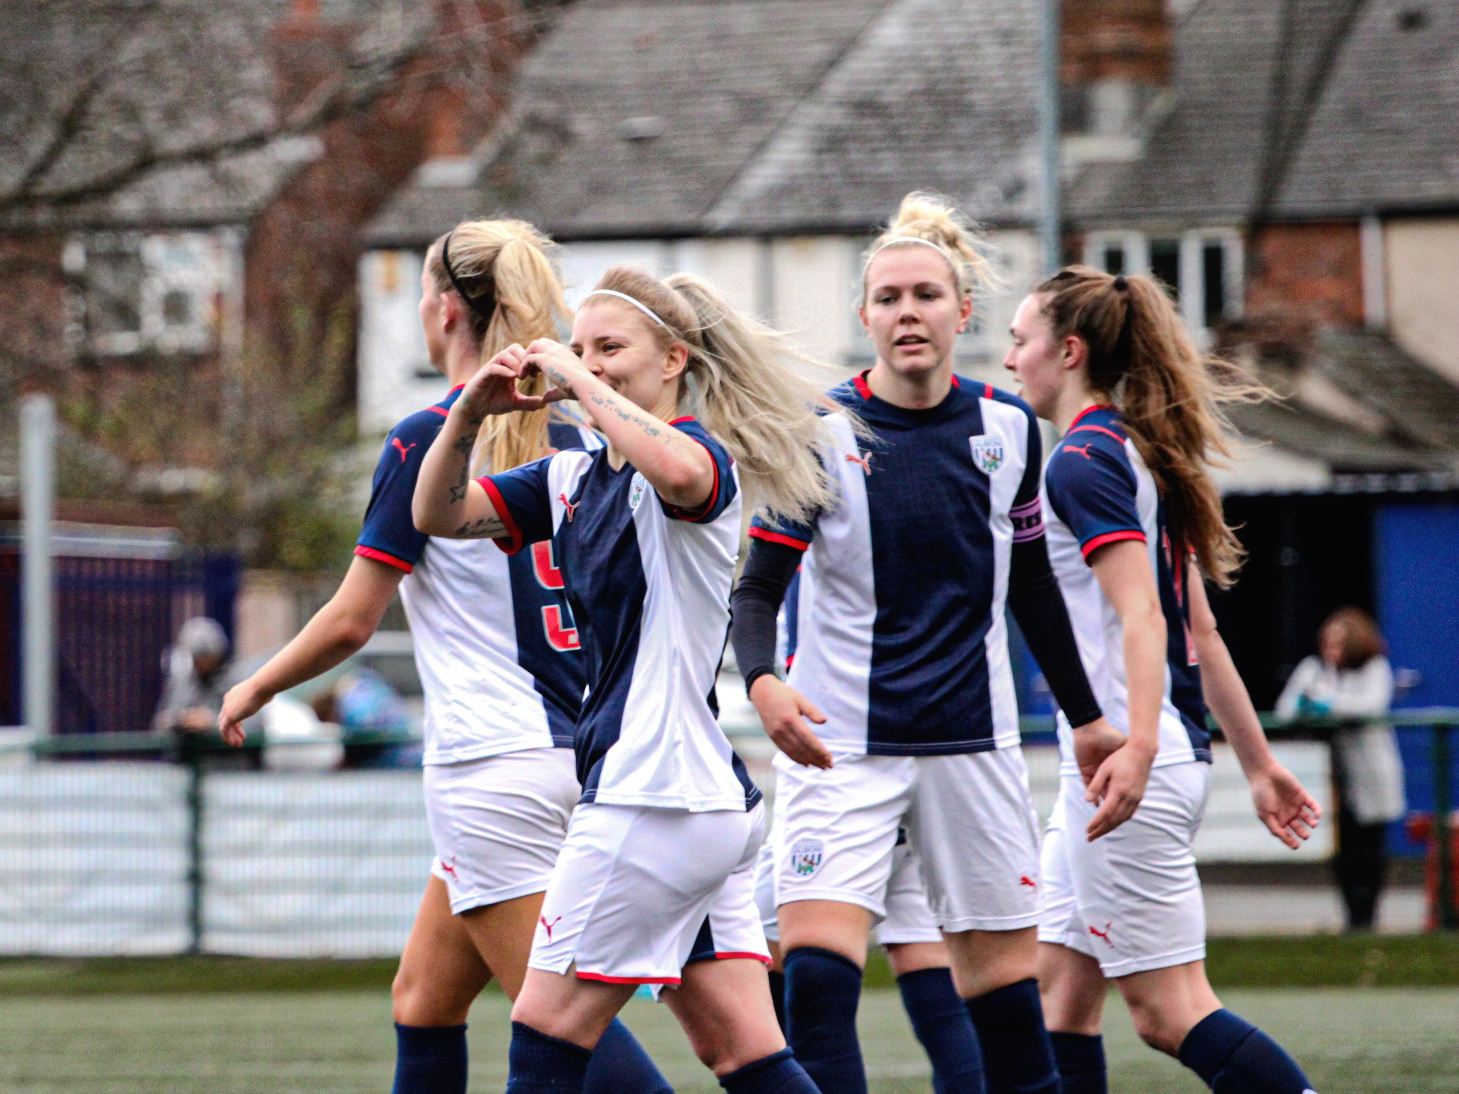 Albion secured their place in round four of the Vitality Women’s FA Cup with an emphatic 5-1 win over Long Eaton United at Coles Lane on Sunday